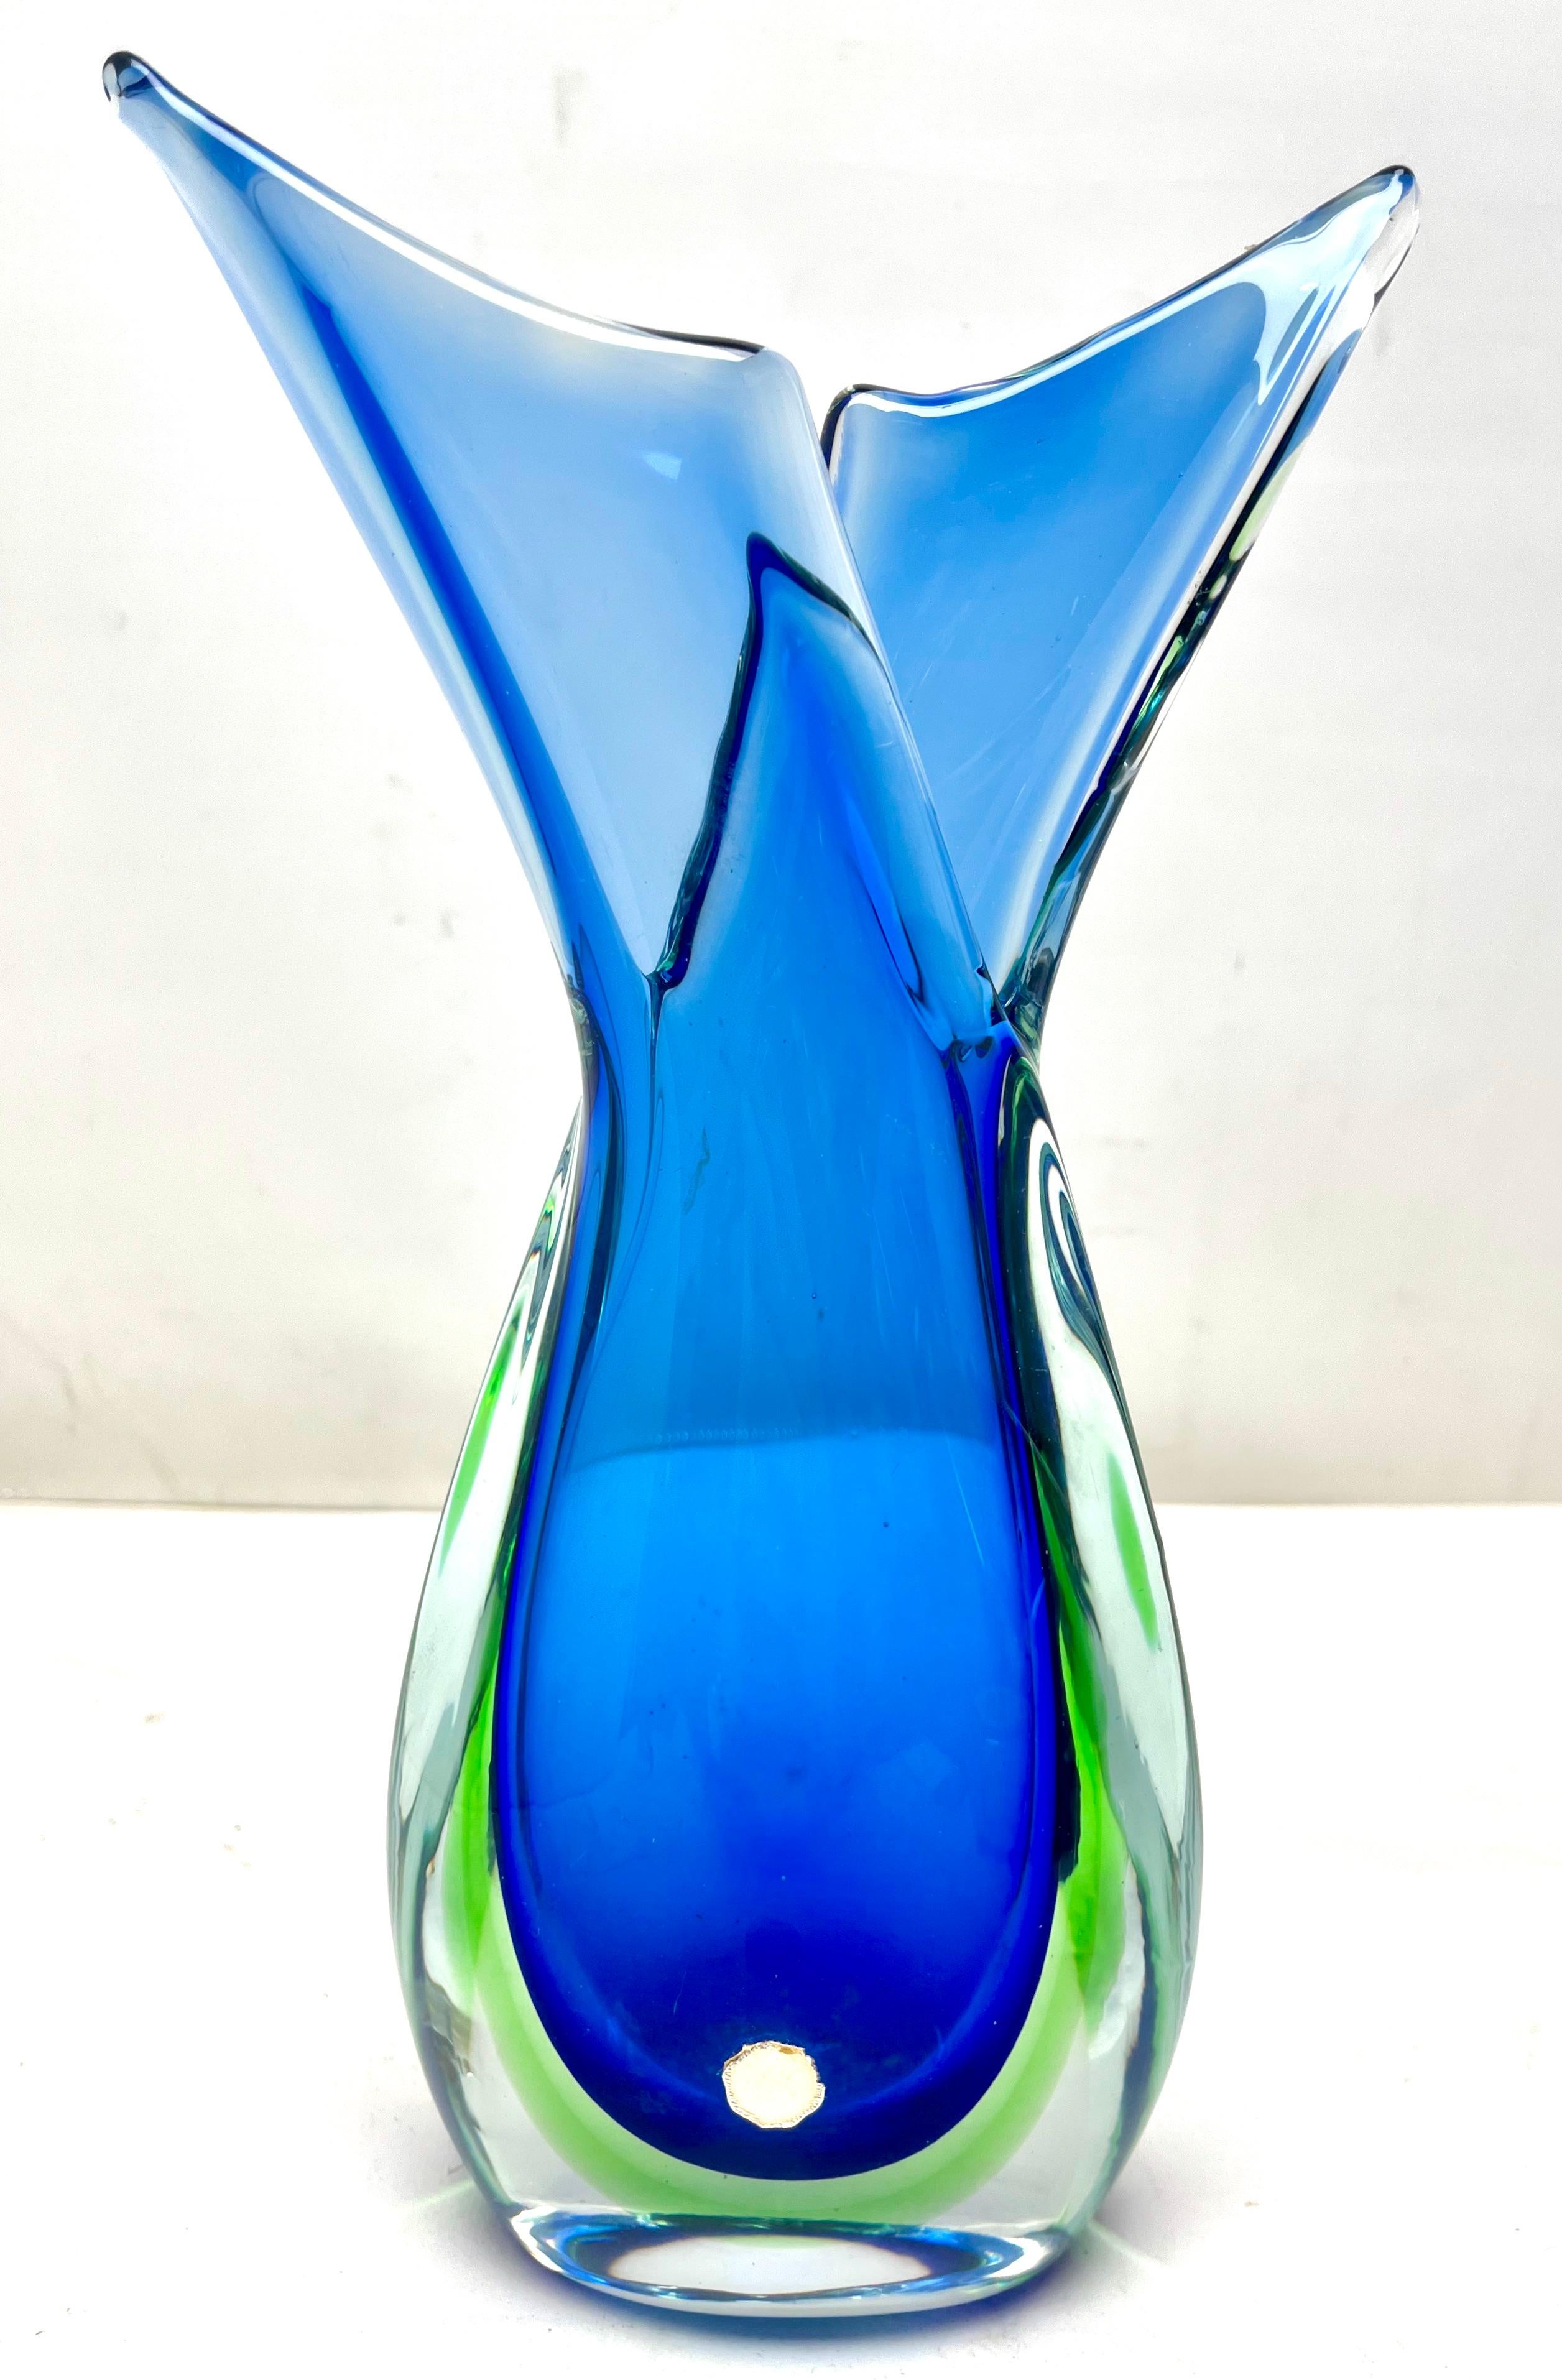 Murano Crystal Designs by Flavio Poli Octegenal vase

This Sommerso design by Flavio Poli was a big hit in the 1950s-1960s. Bright and distinctive, the design is simple, but requires the skilled craftsmanship of Murano.

These items are easily